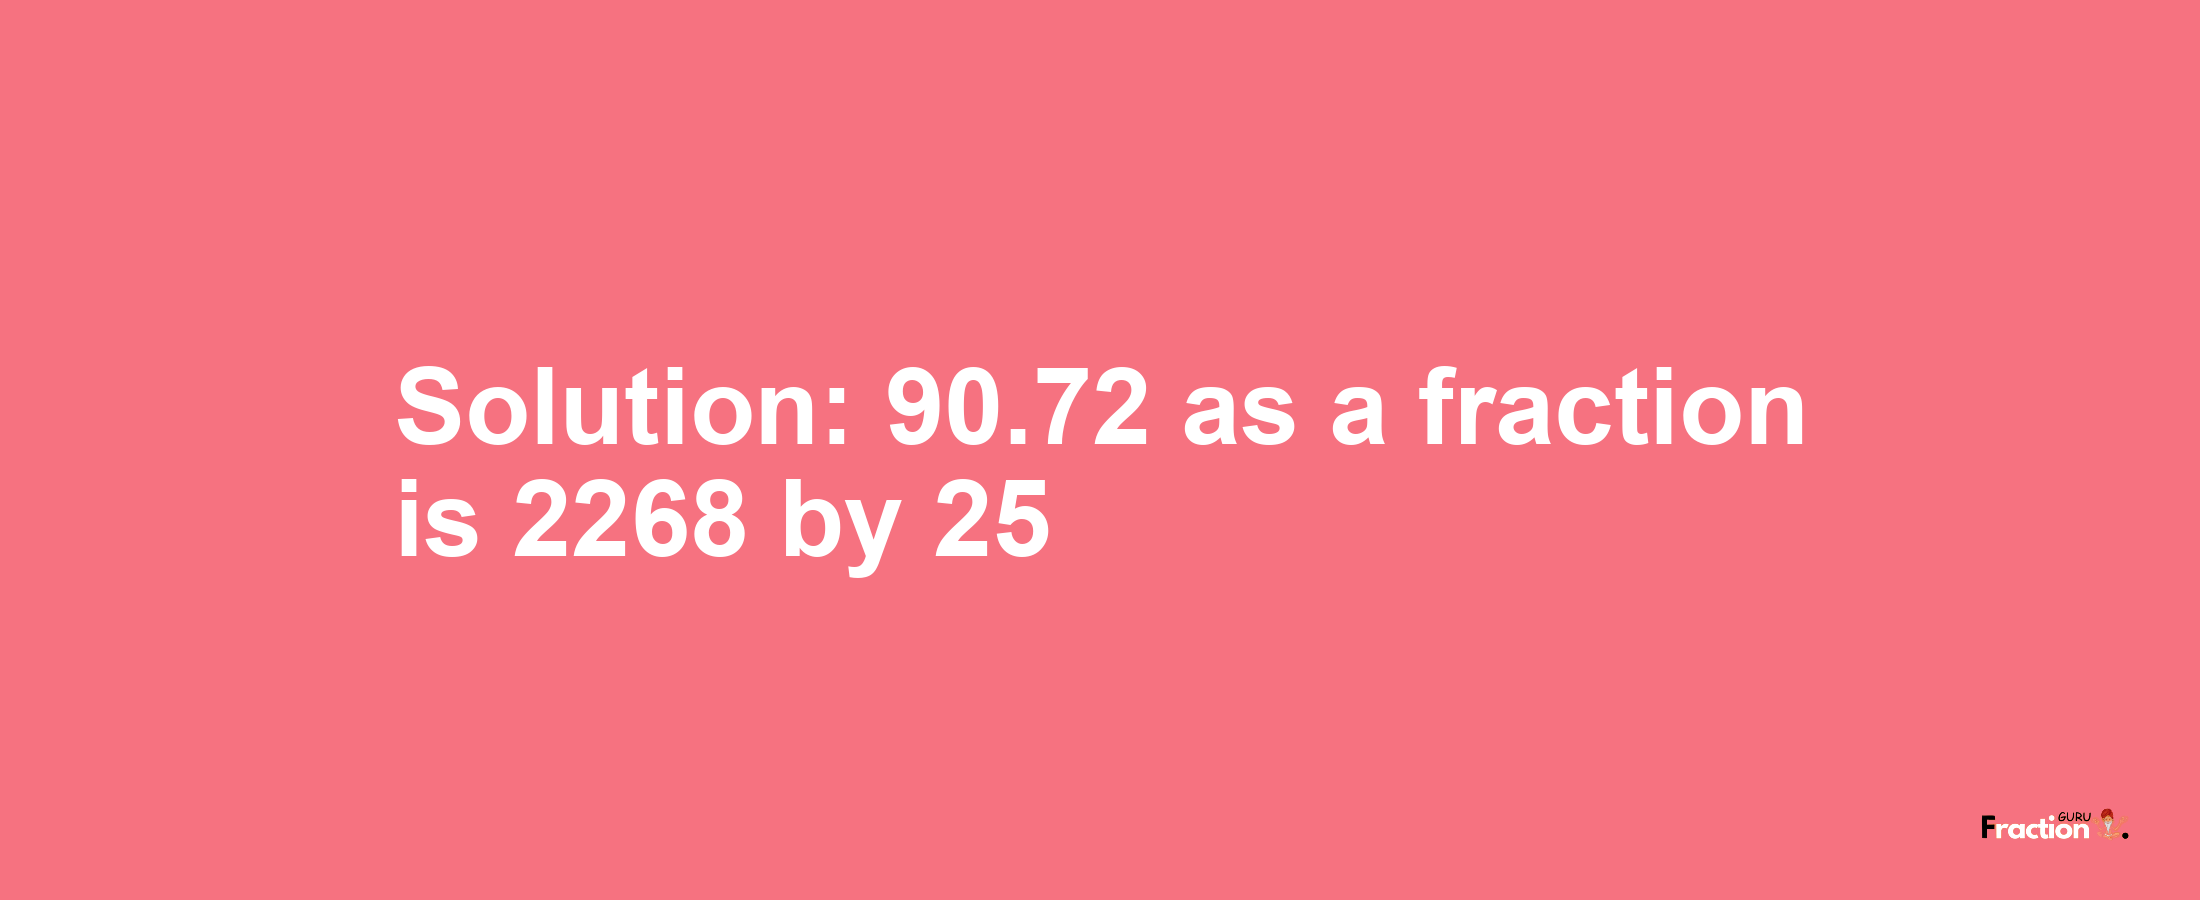 Solution:90.72 as a fraction is 2268/25